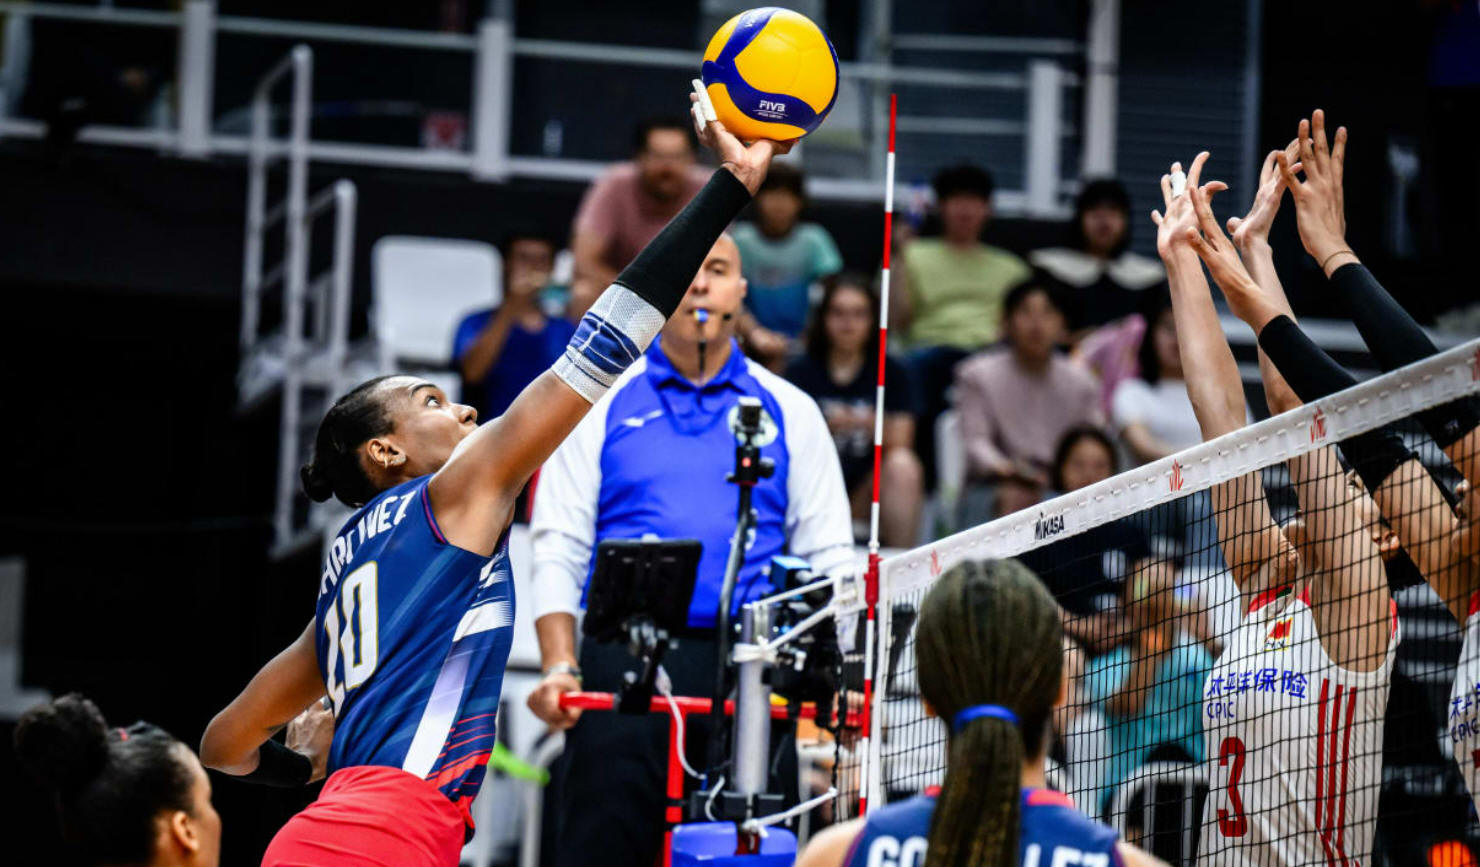 Women’s Volleyball Olympic Qualifying Tournament to get underway